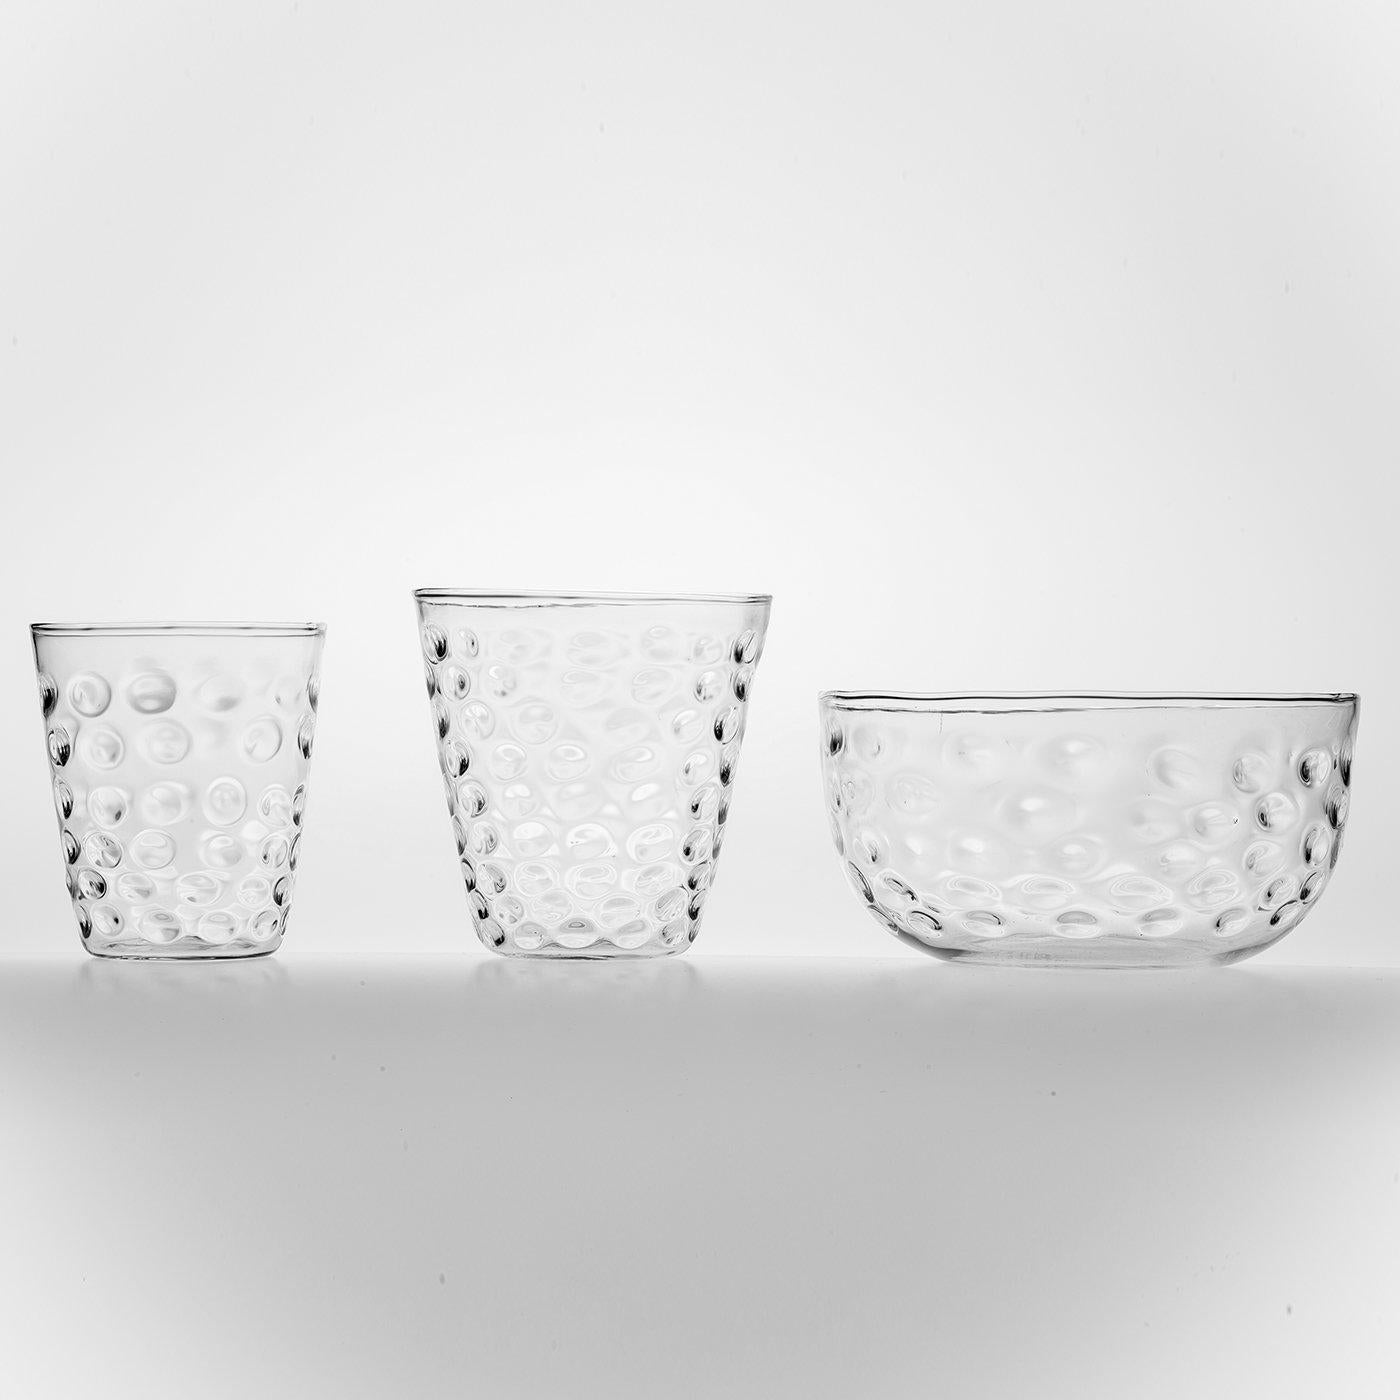 Set of 6 water or wine glasses with an inimitable quality. Handcrafted in Venice, the form of the glasses is finished with a deft bubble effect that creates an elegant interplay of light.